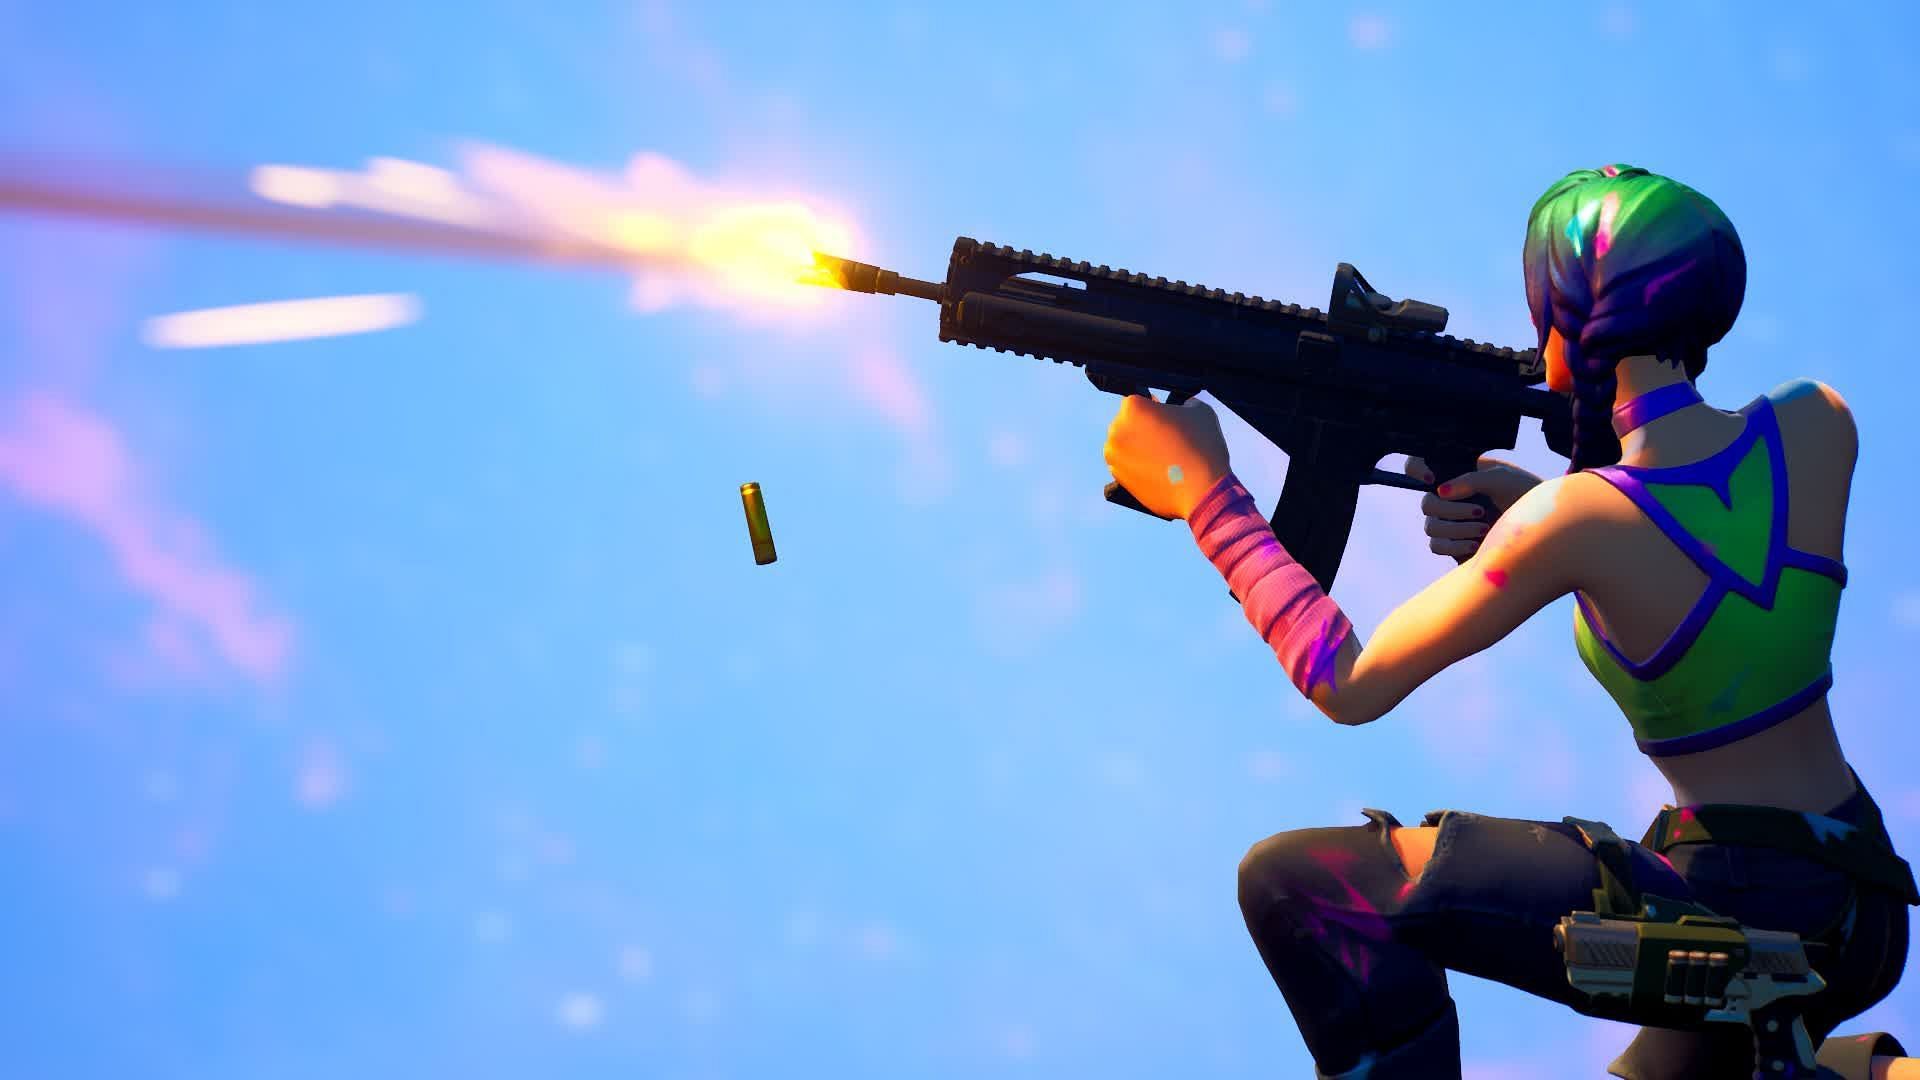 Can we get some kind of glitch skin like it's glitching out and is active  like this pic ? Would be pretty cool if it was a legendary or epic . If